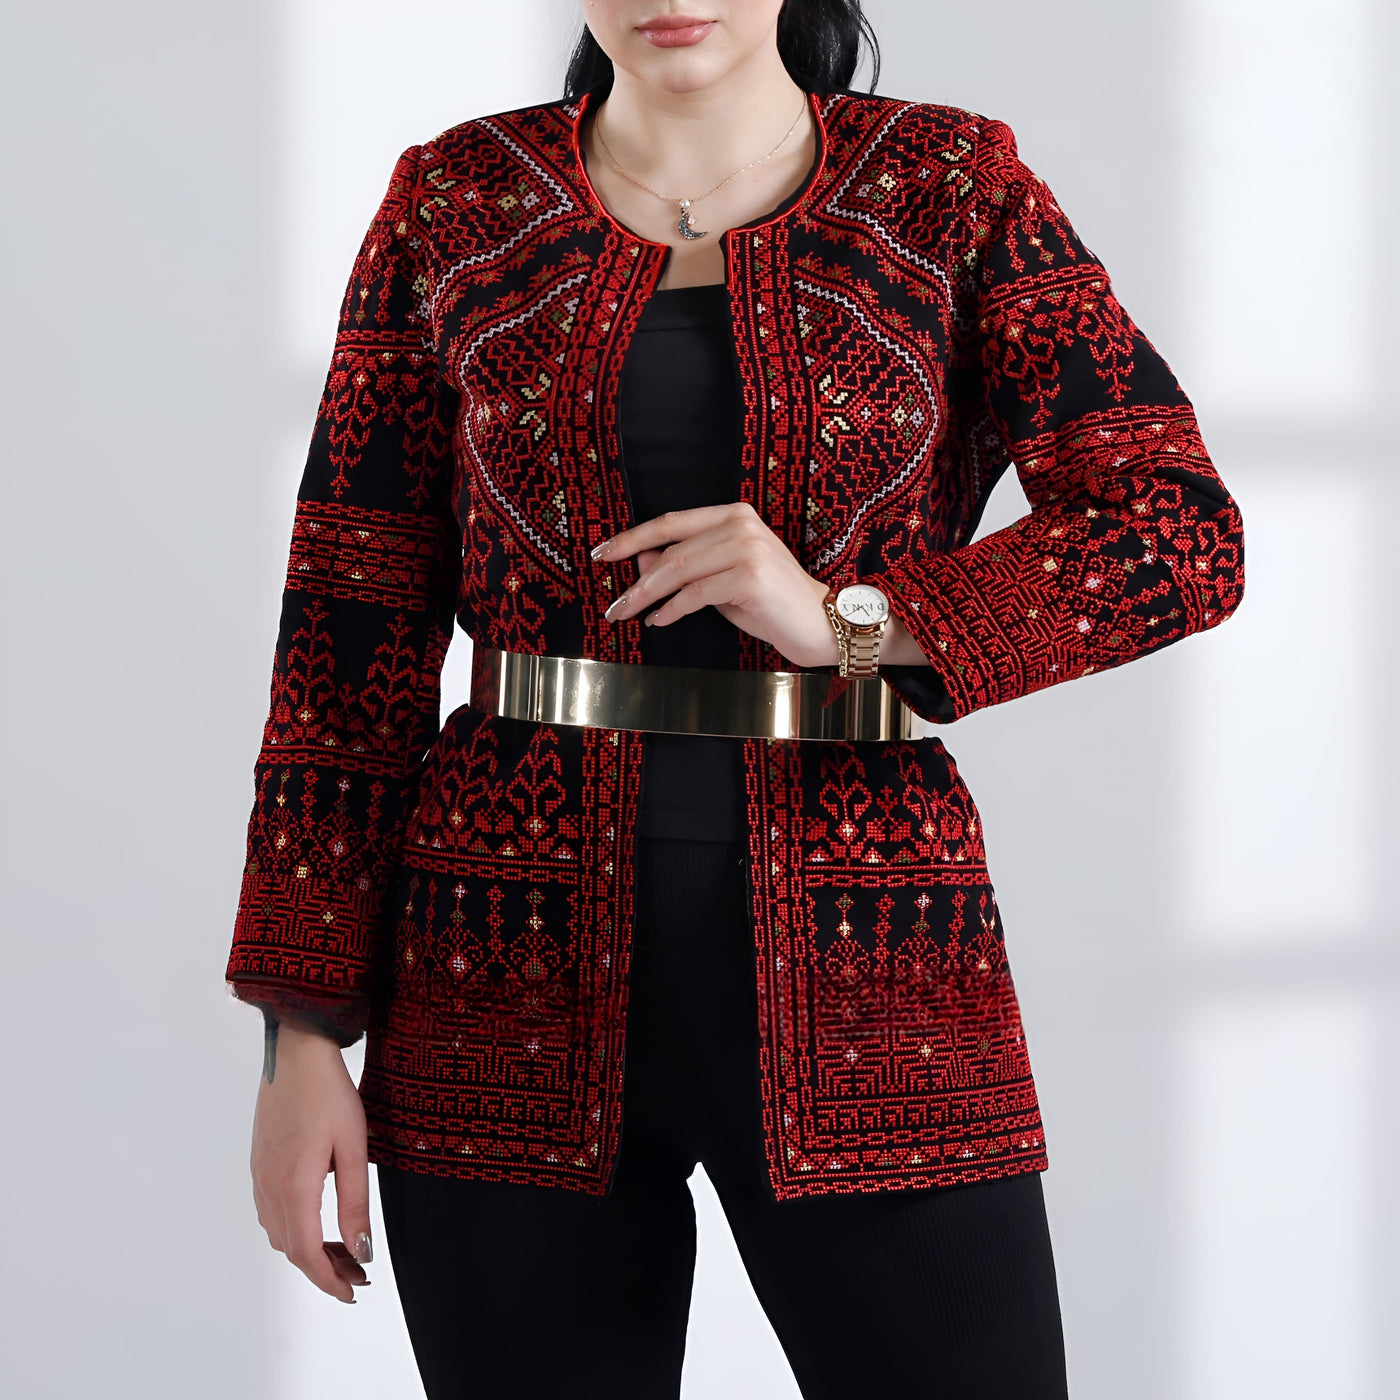 Embroidered Jacket With Collar - Palestinian / Jordanian style